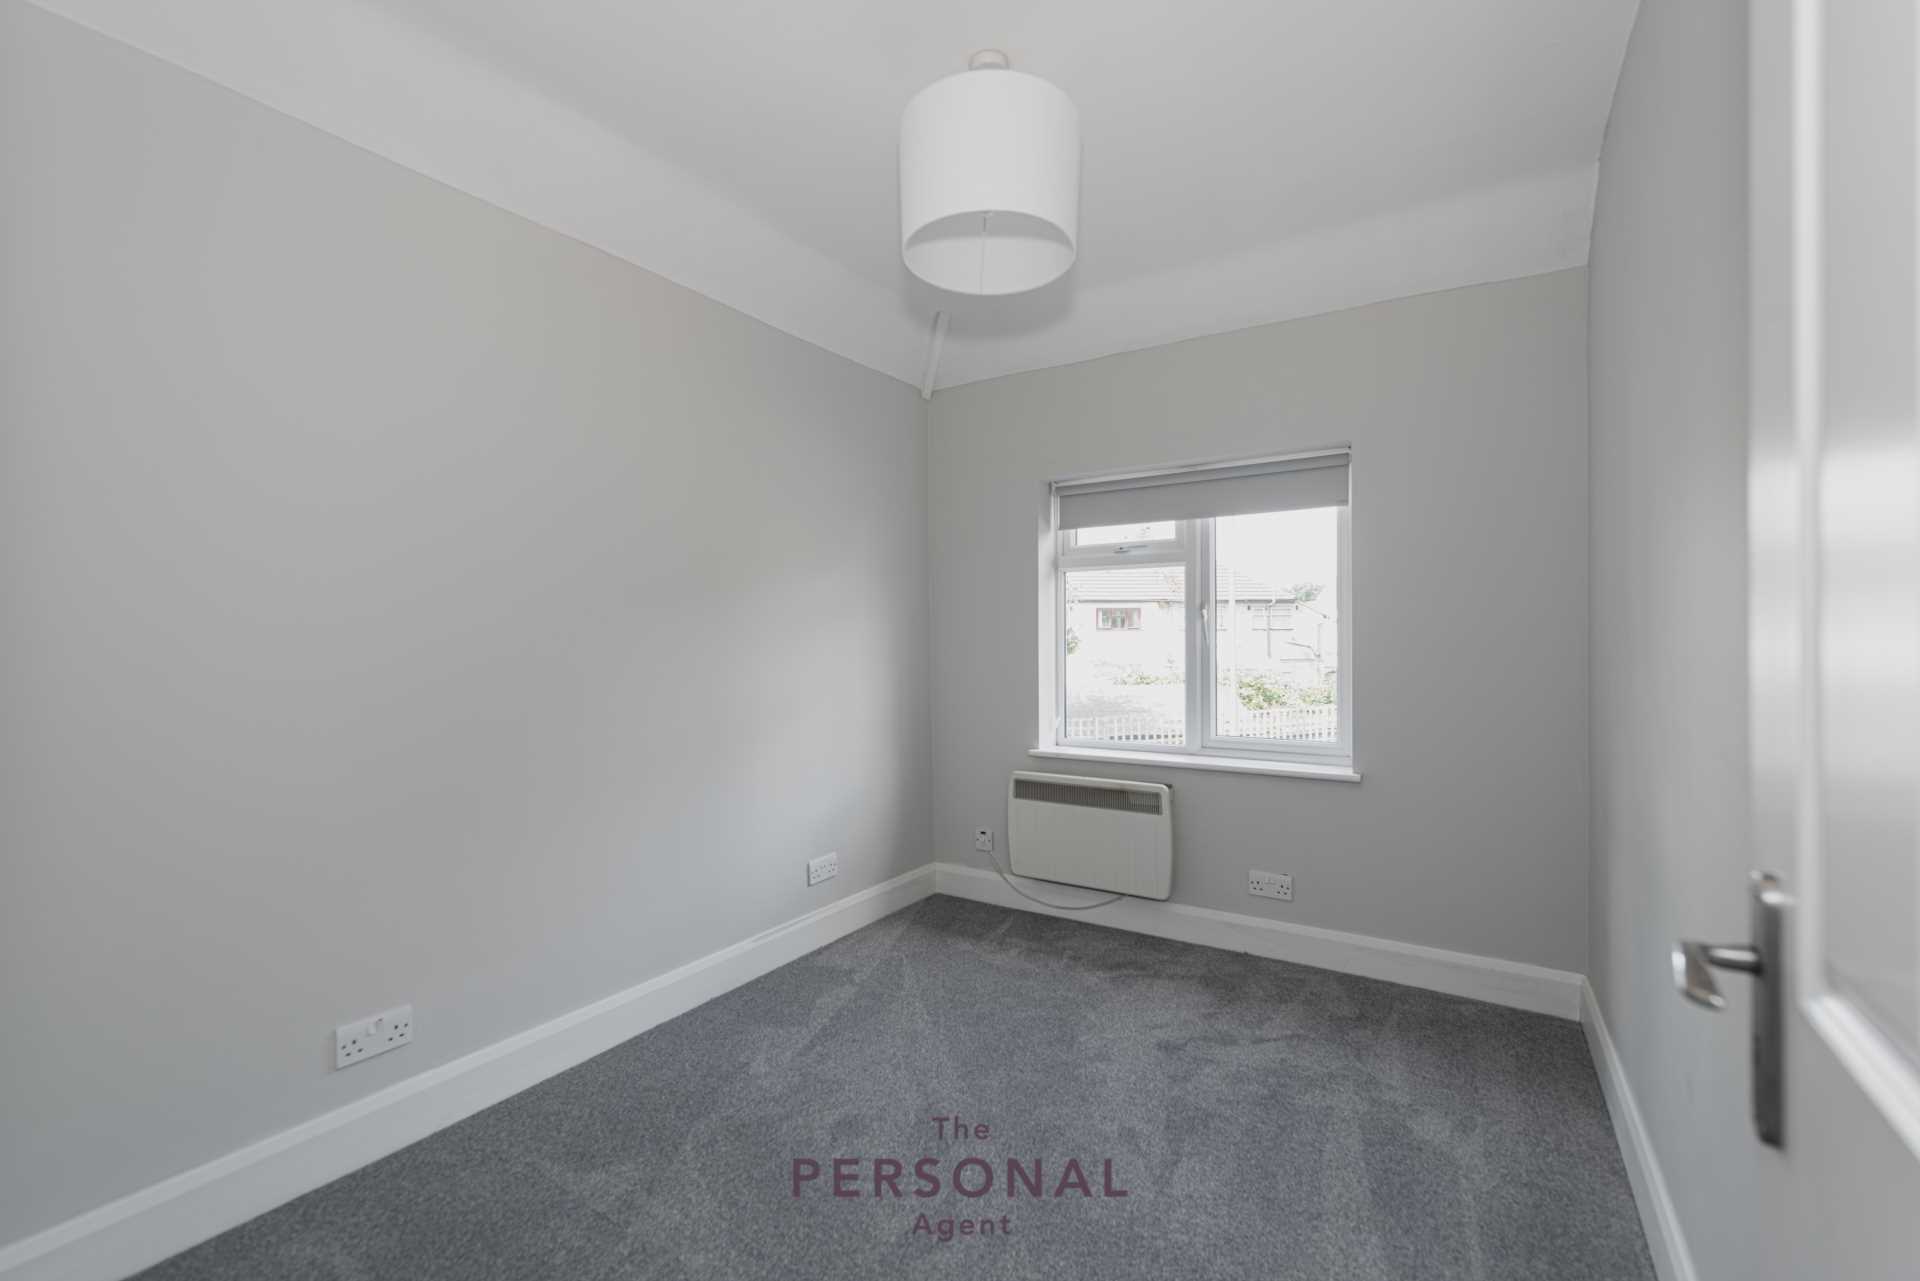 1 bed Room for rent in Epsom. From The Personal Agent - Epsom